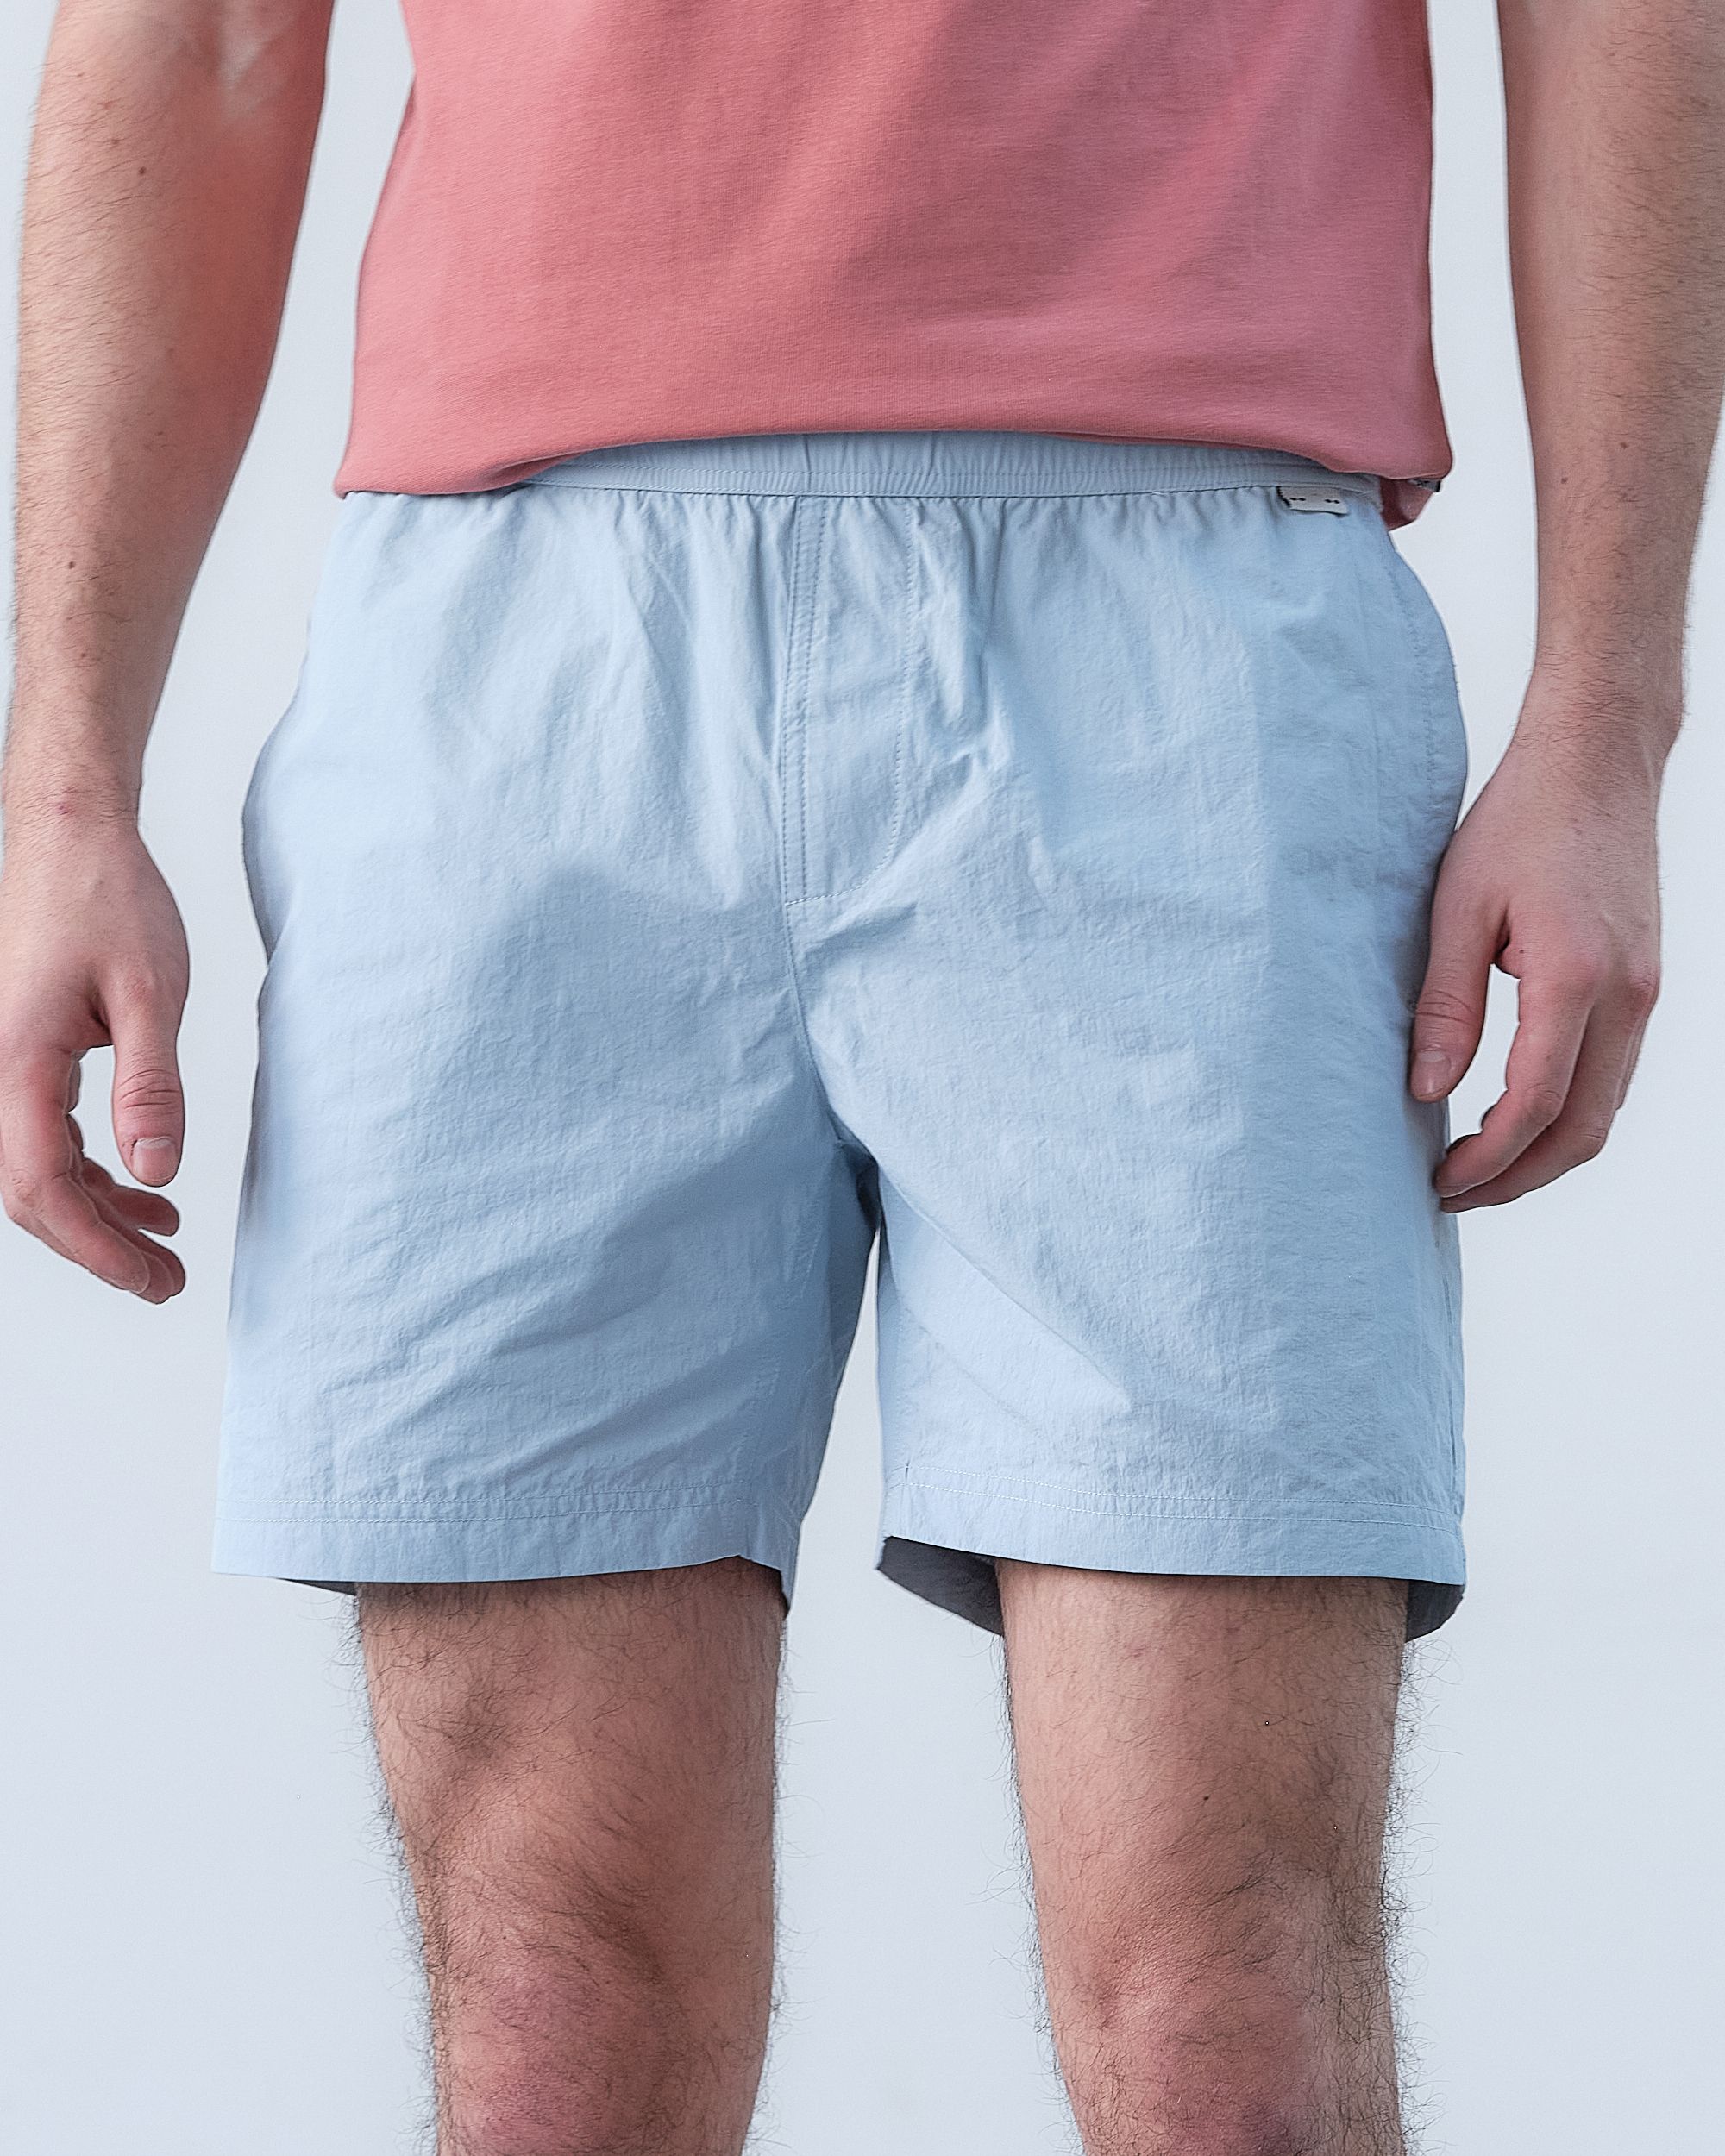 J.C. RAGS Short Forget-me-not 081579-005-L